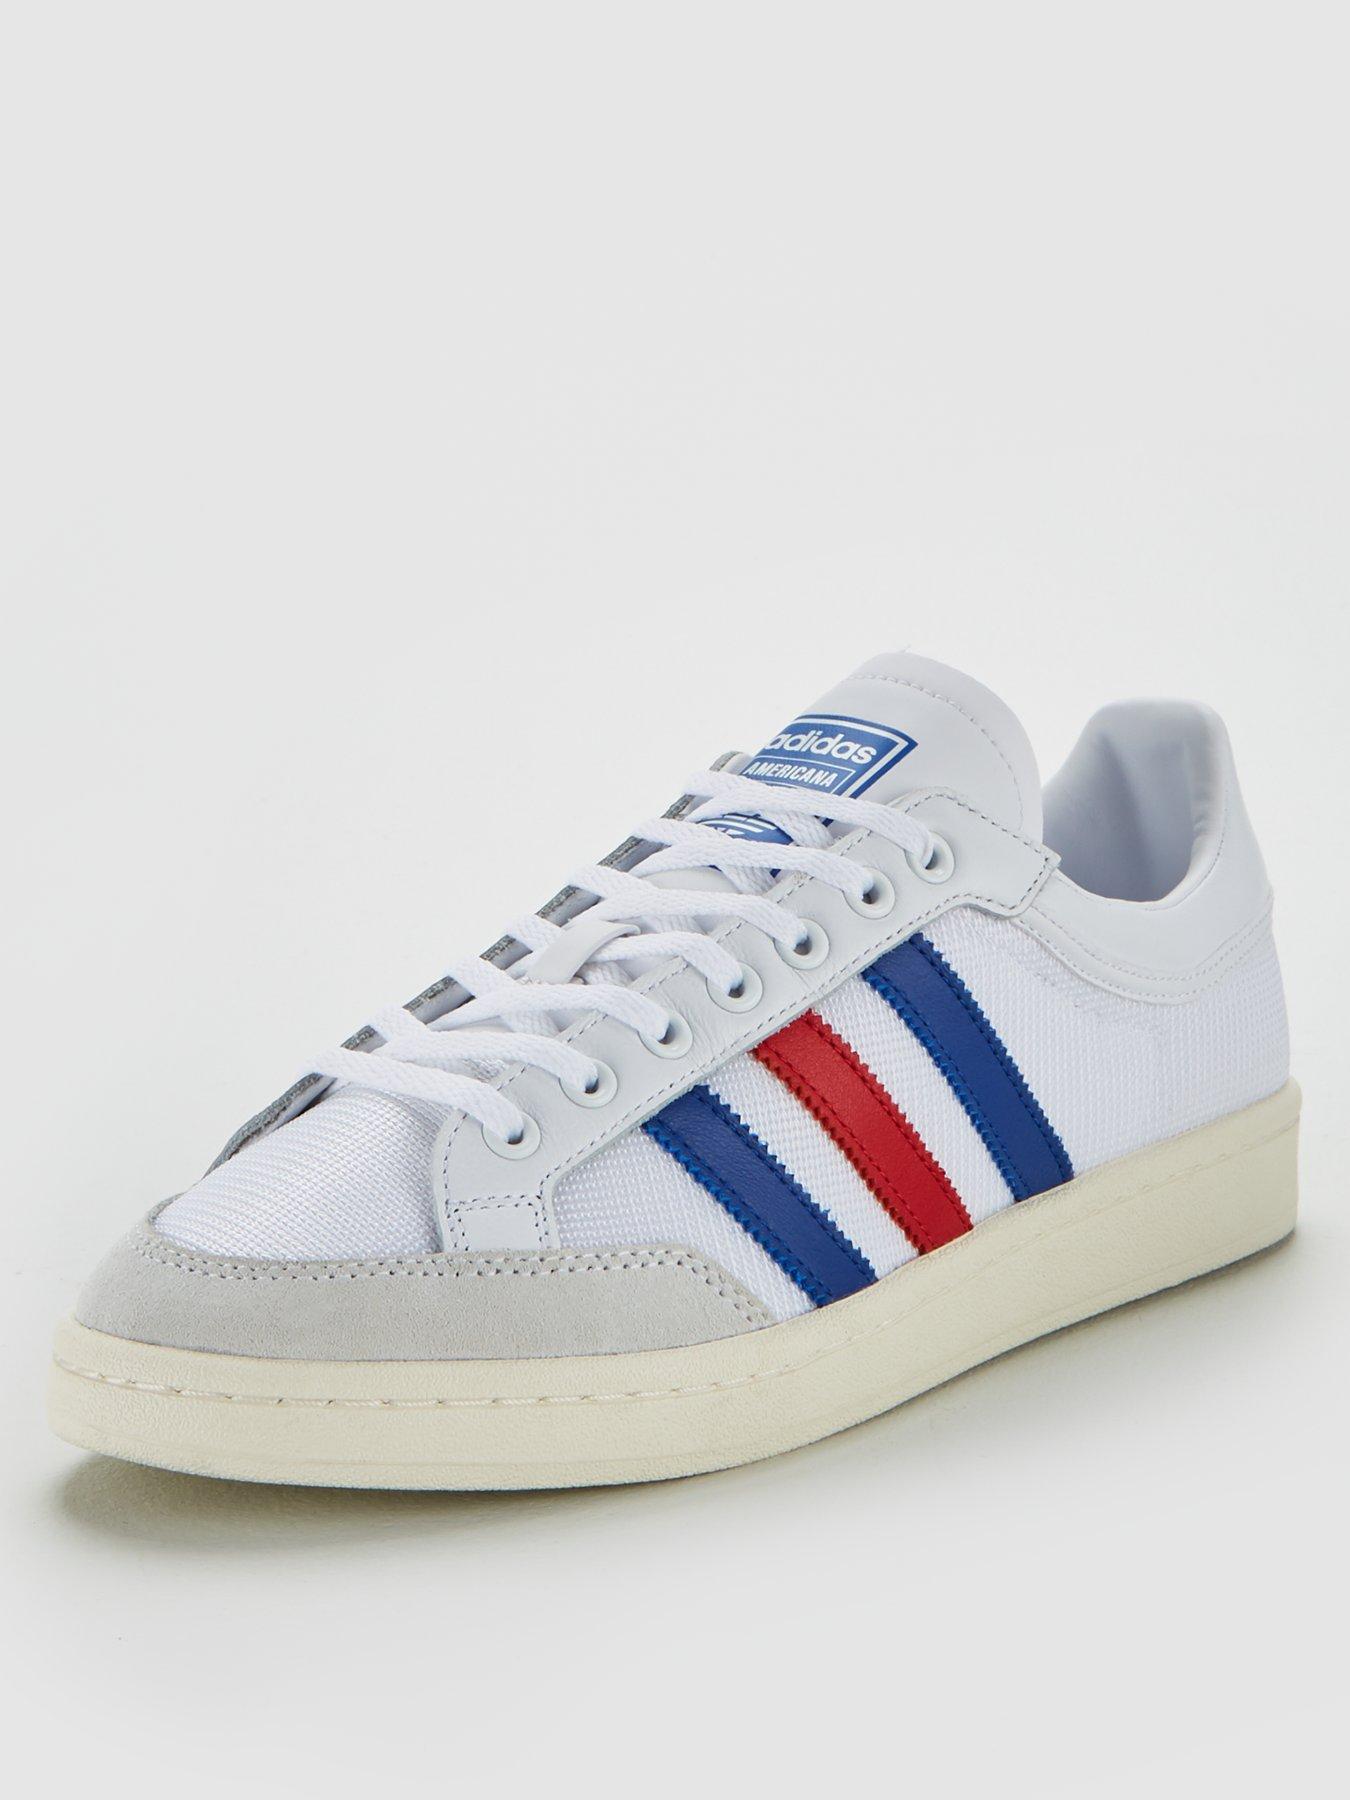 red blue white adidas